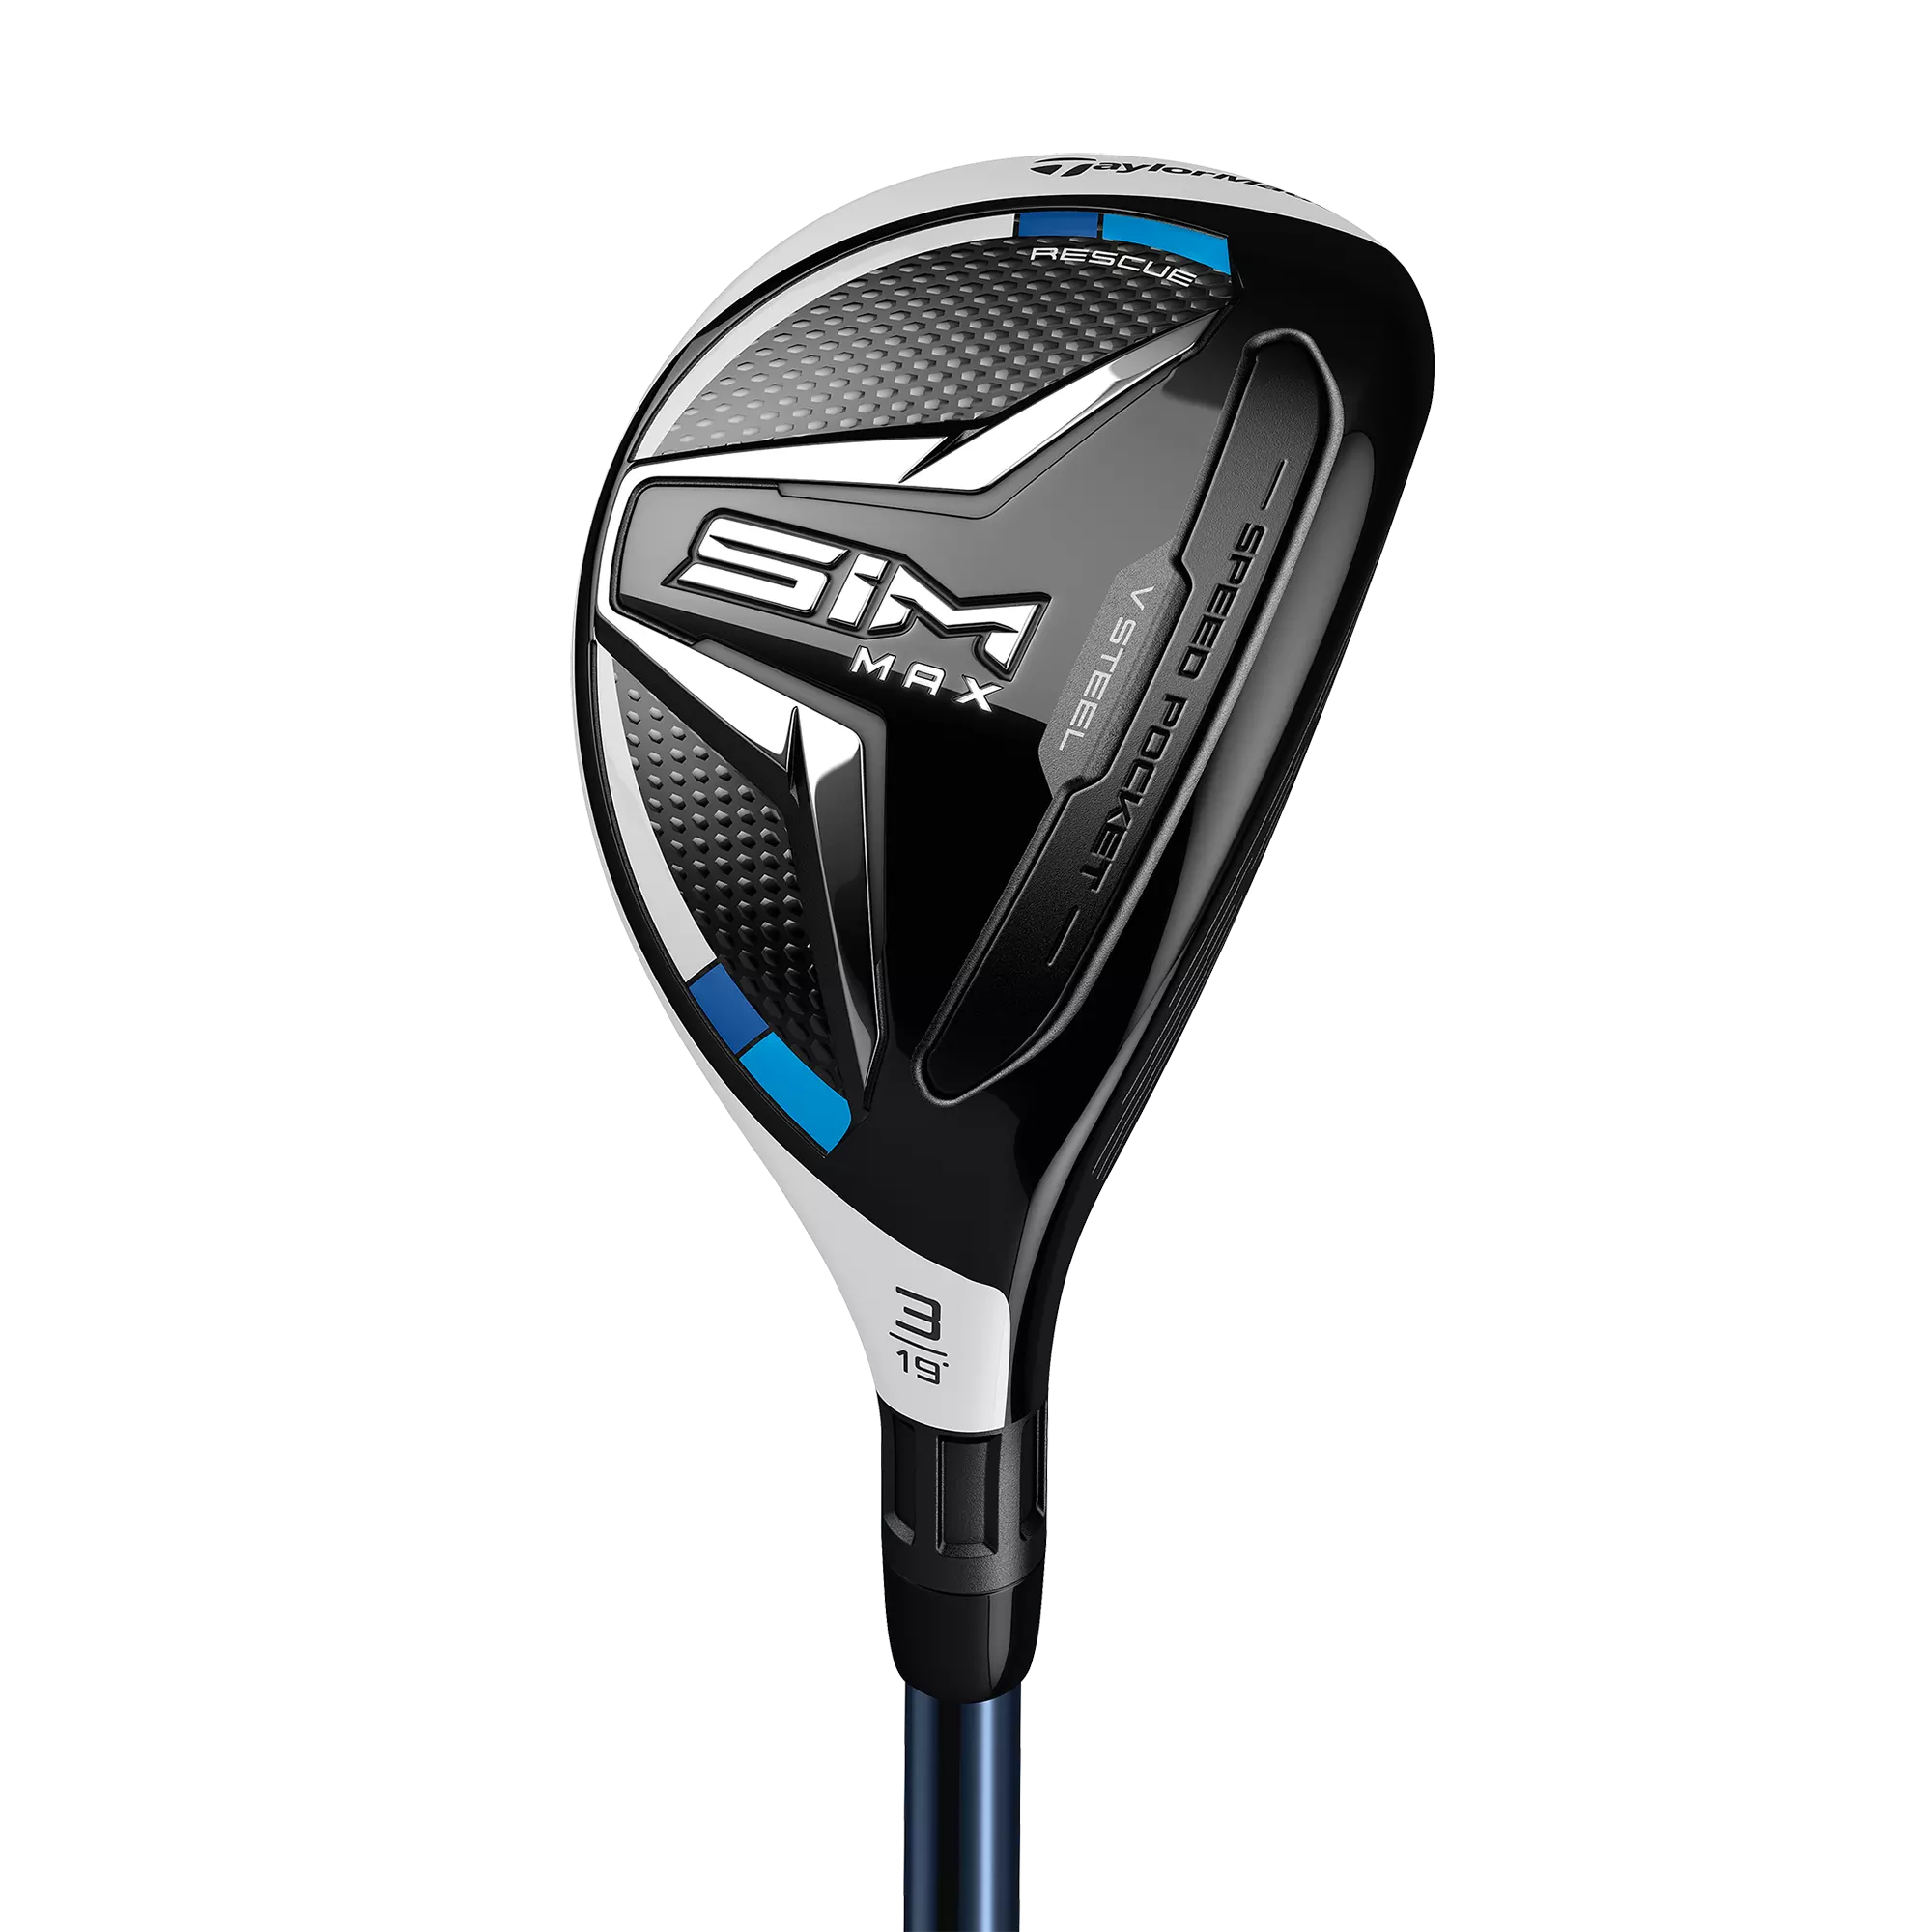 The TaylorMade SIM MAX Golf Hybrid comes in a black shell with a white and blue outline that provides great eye appeal for all types of golfers